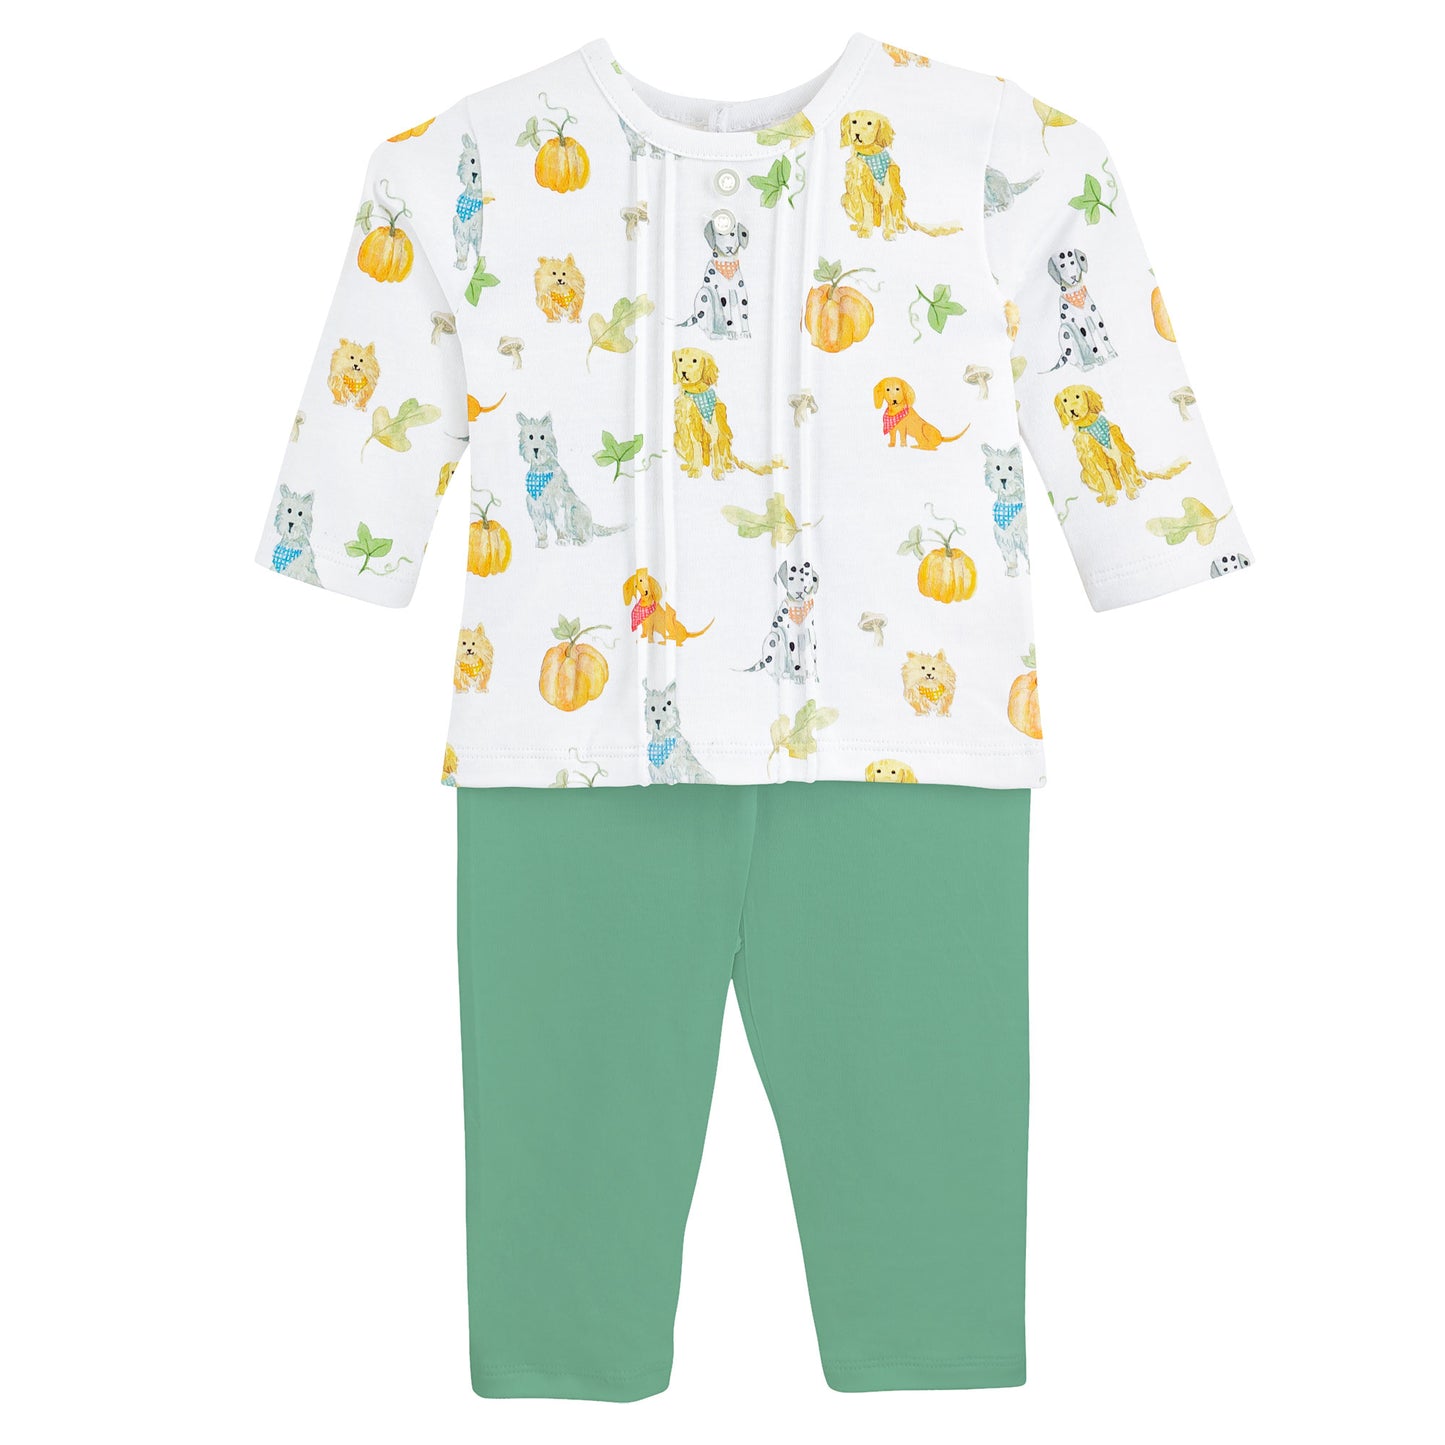 Tee and Pant Set | Harvest Time